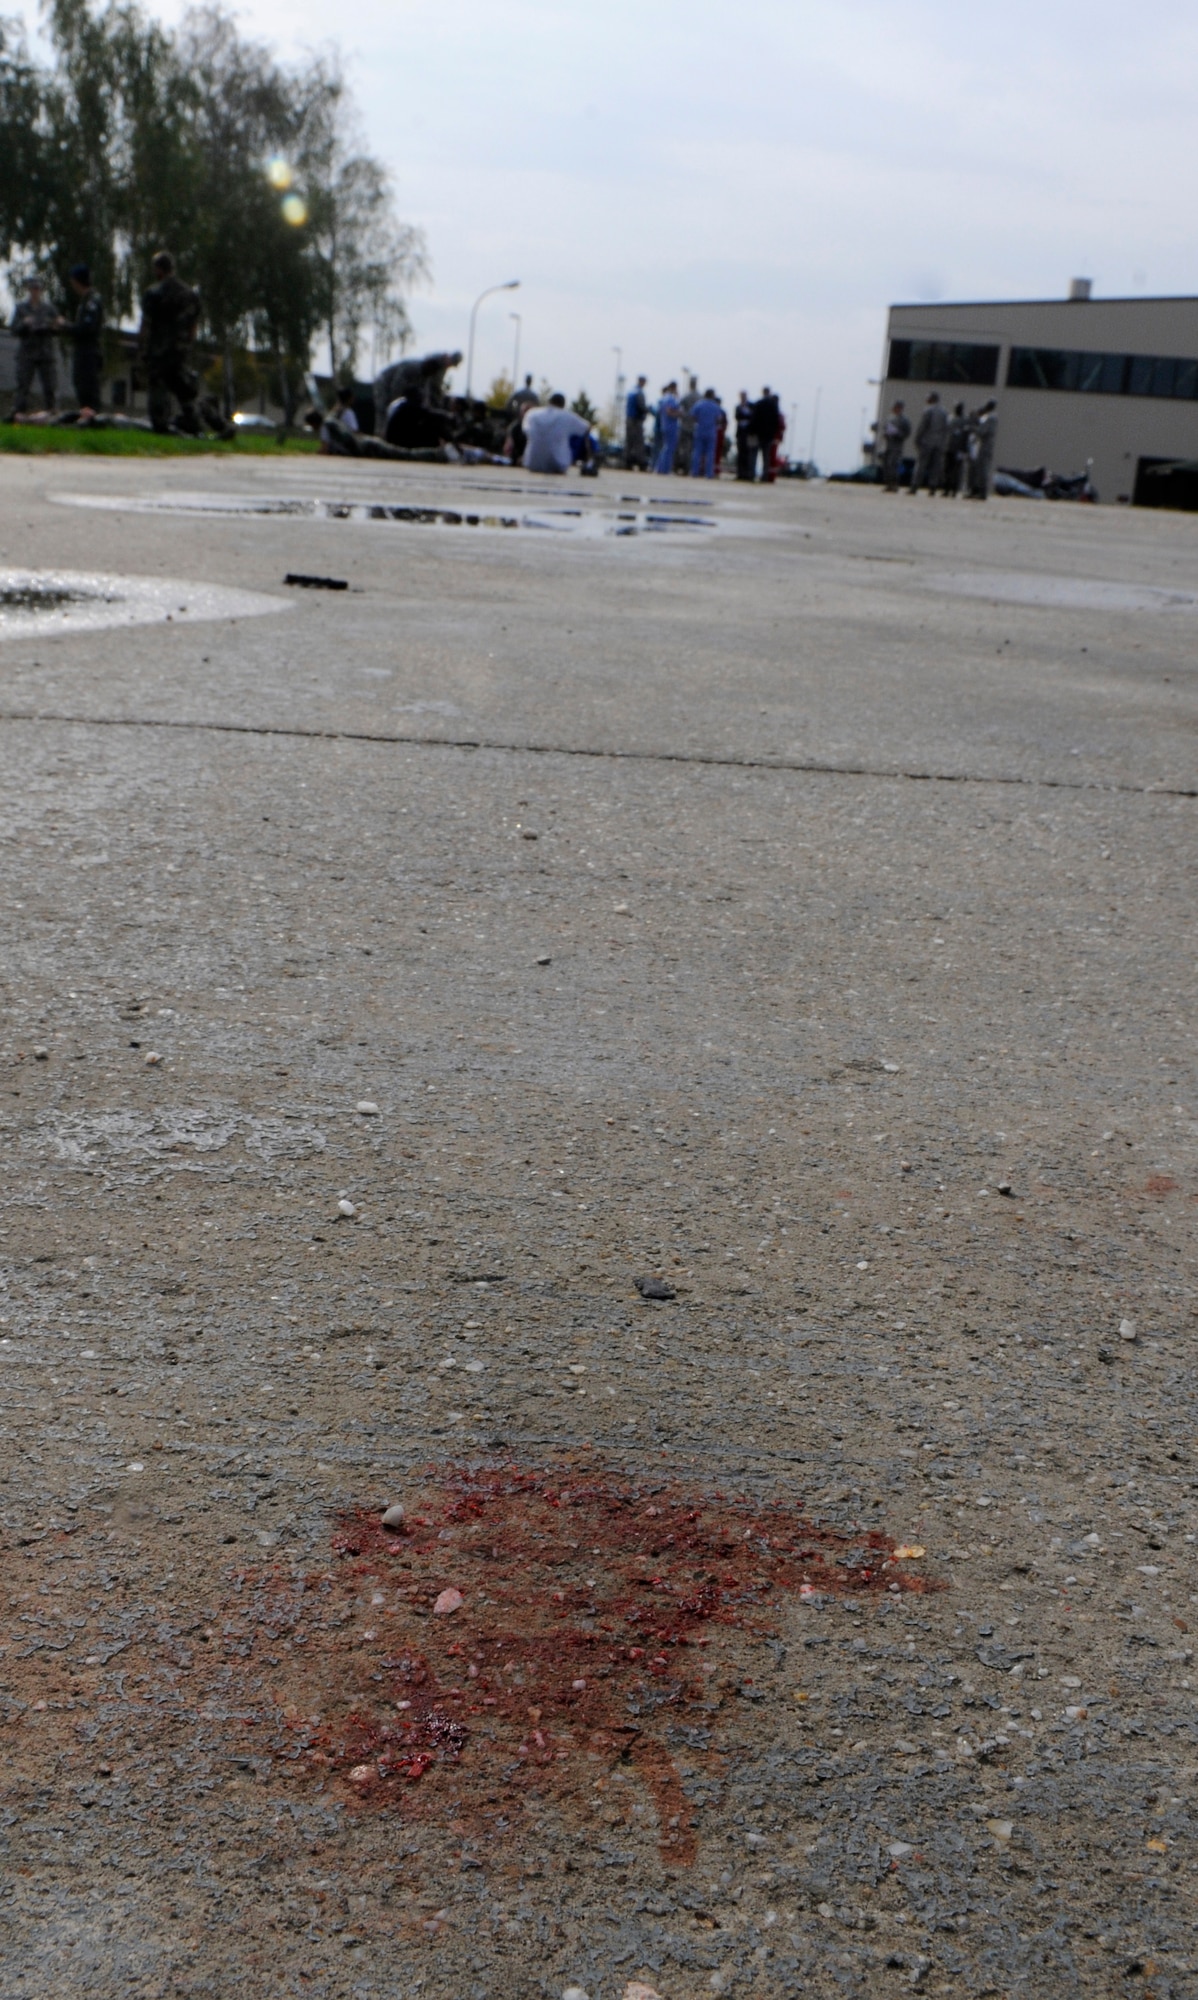 SPANGDAHLEM AIR BASE, Germany – Simulated blood splatter is left behind during an all hazards response training emergency management and mass casualty exercise Oct. 7. (U.S. Air Force photo/Airman 1st Class Staci Miller)